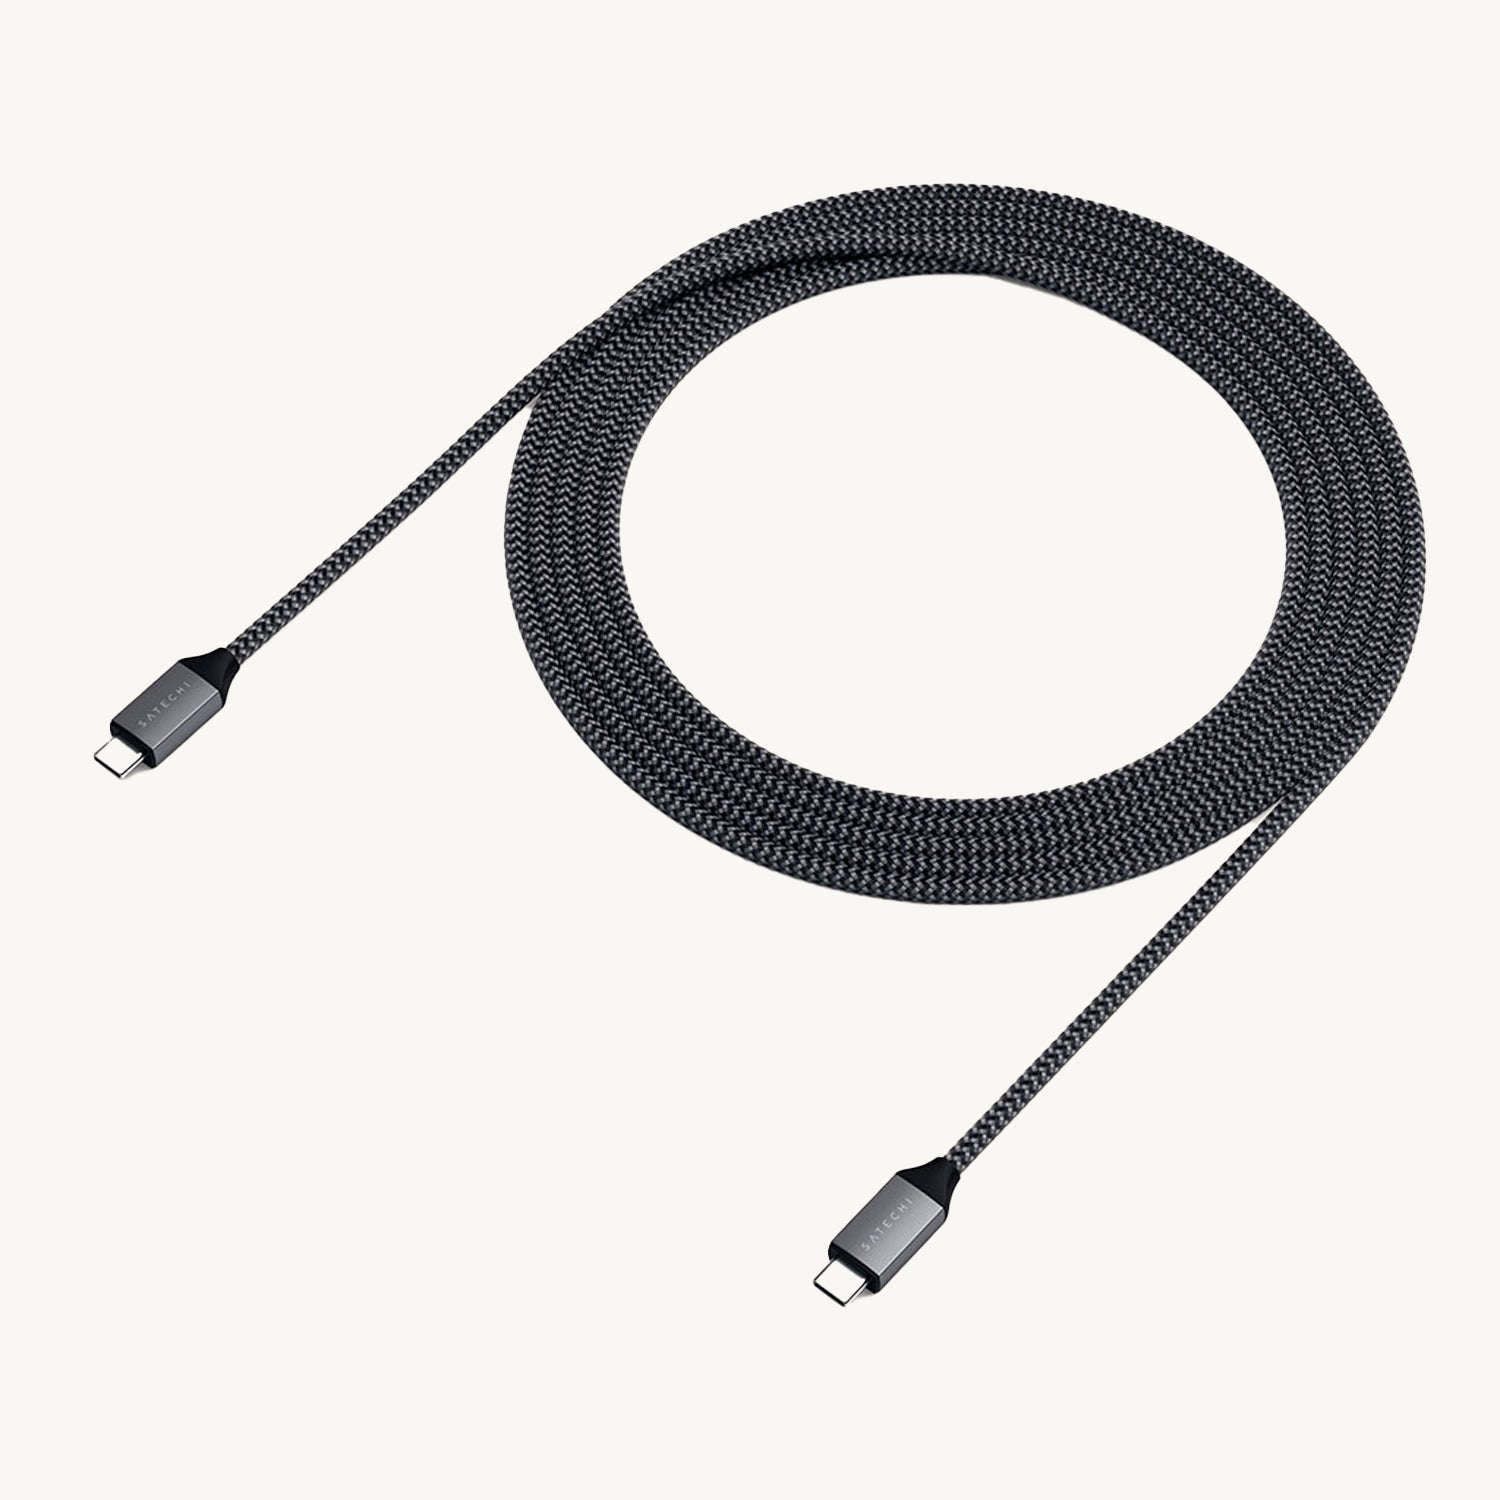 Satechi USB-C Charging Cable